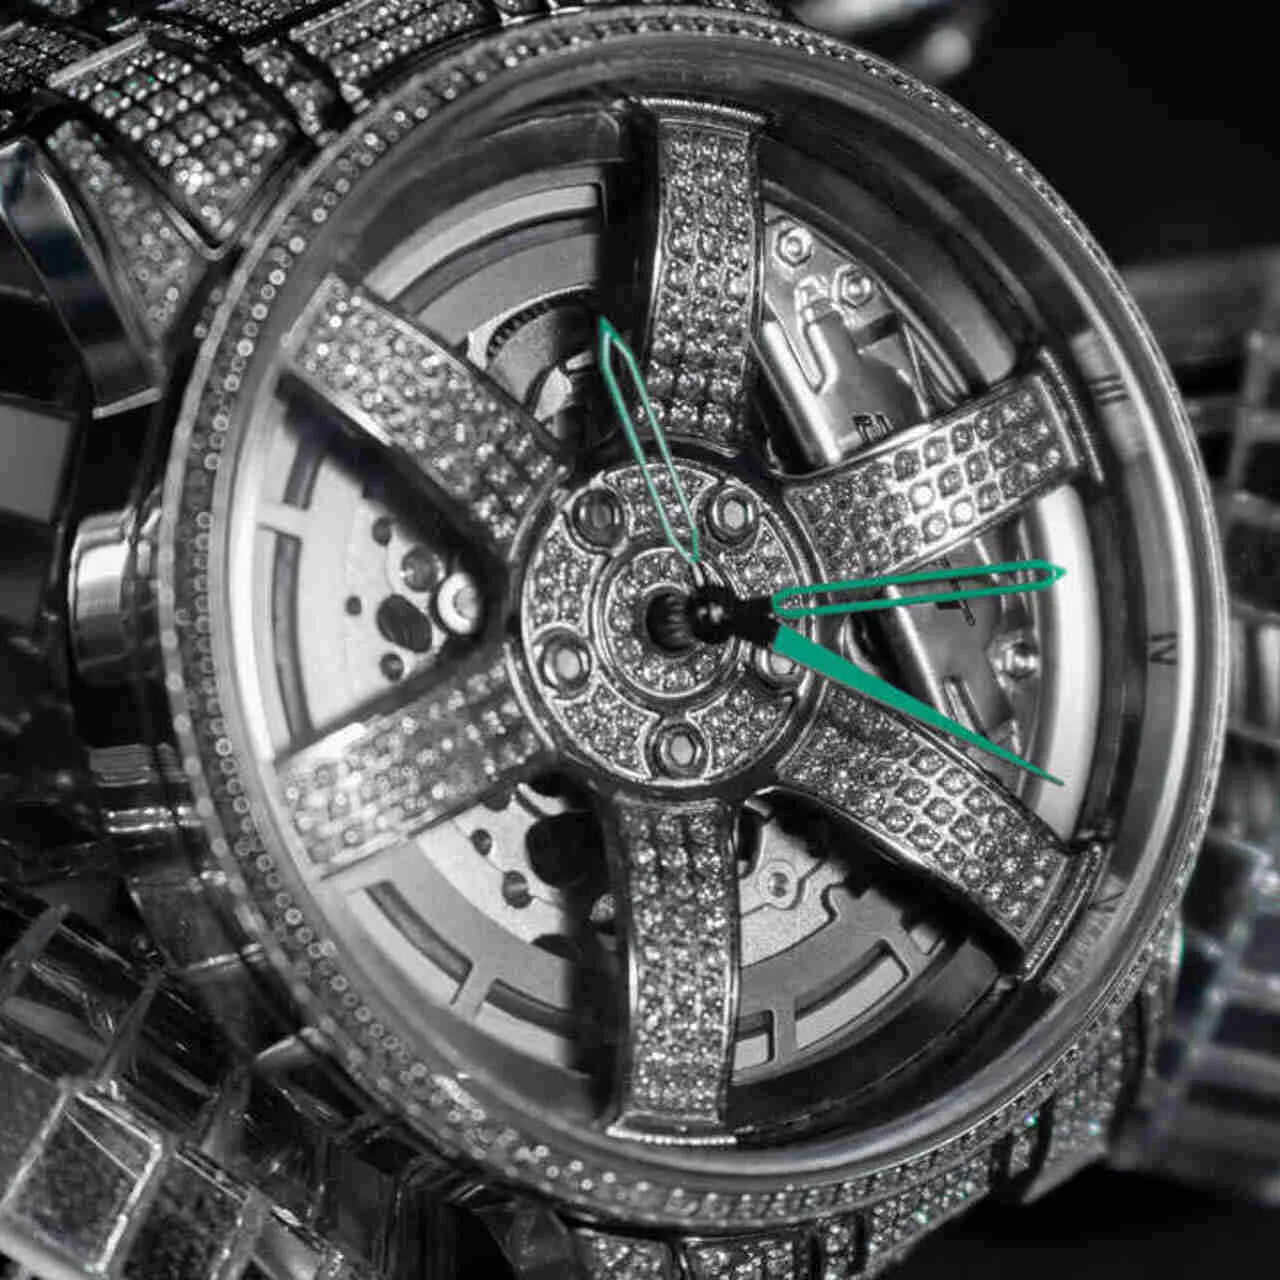 3RD ANNIVERSARY FELGENUHR ICED OUT - AUTOMATIK